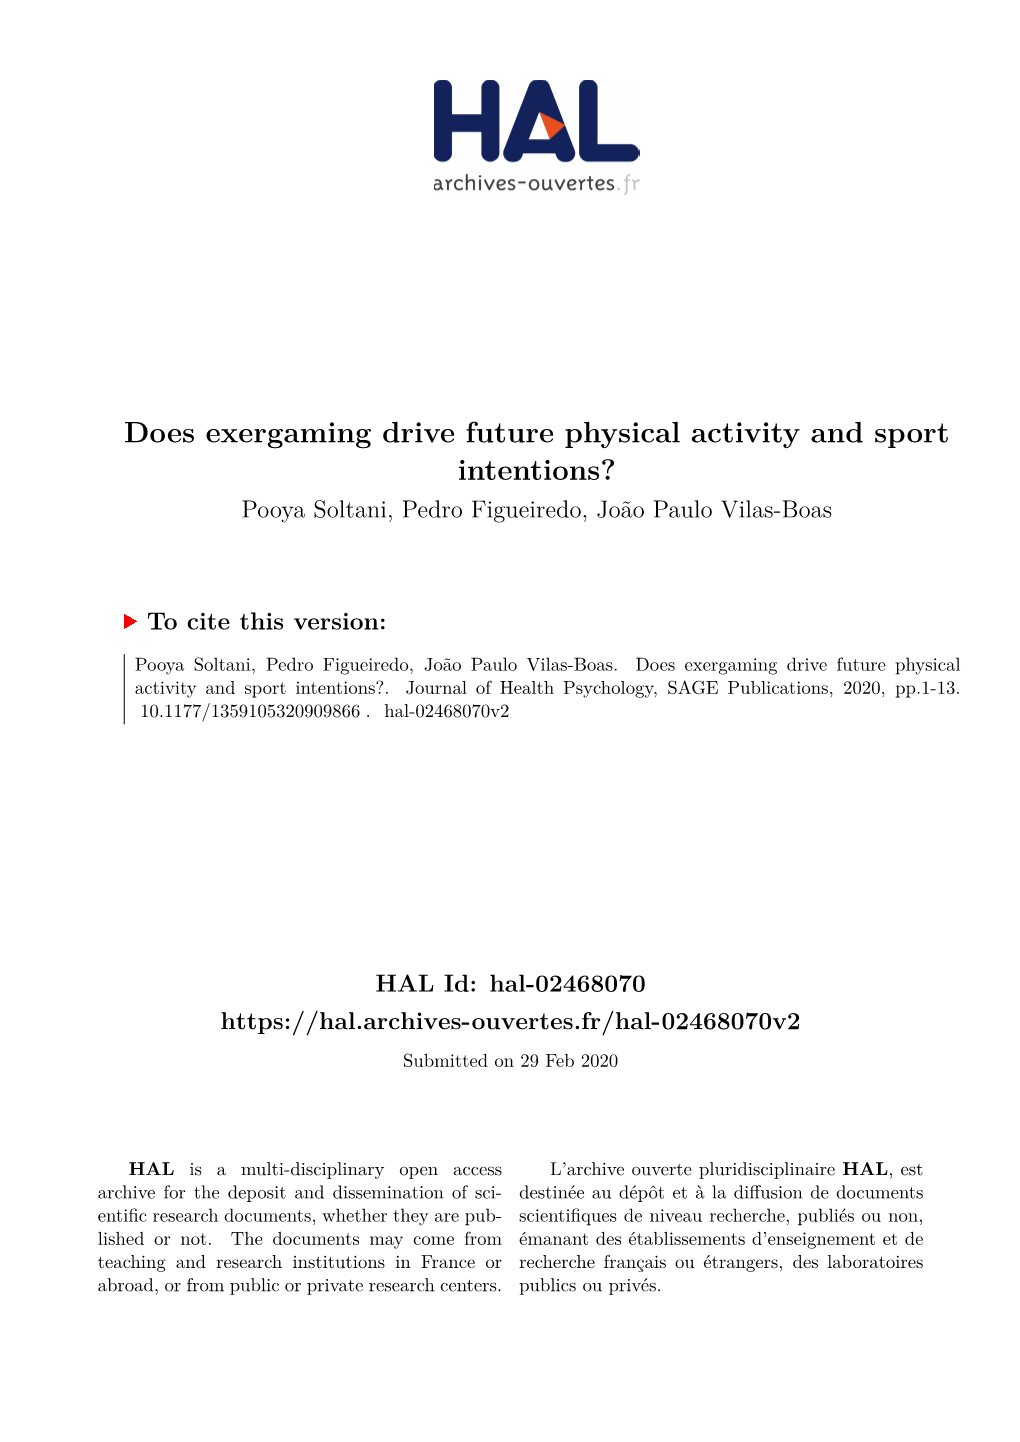 Does Exergaming Drive Future Physical Activity and Sport Intentions? Pooya Soltani, Pedro Figueiredo, João Paulo Vilas-Boas